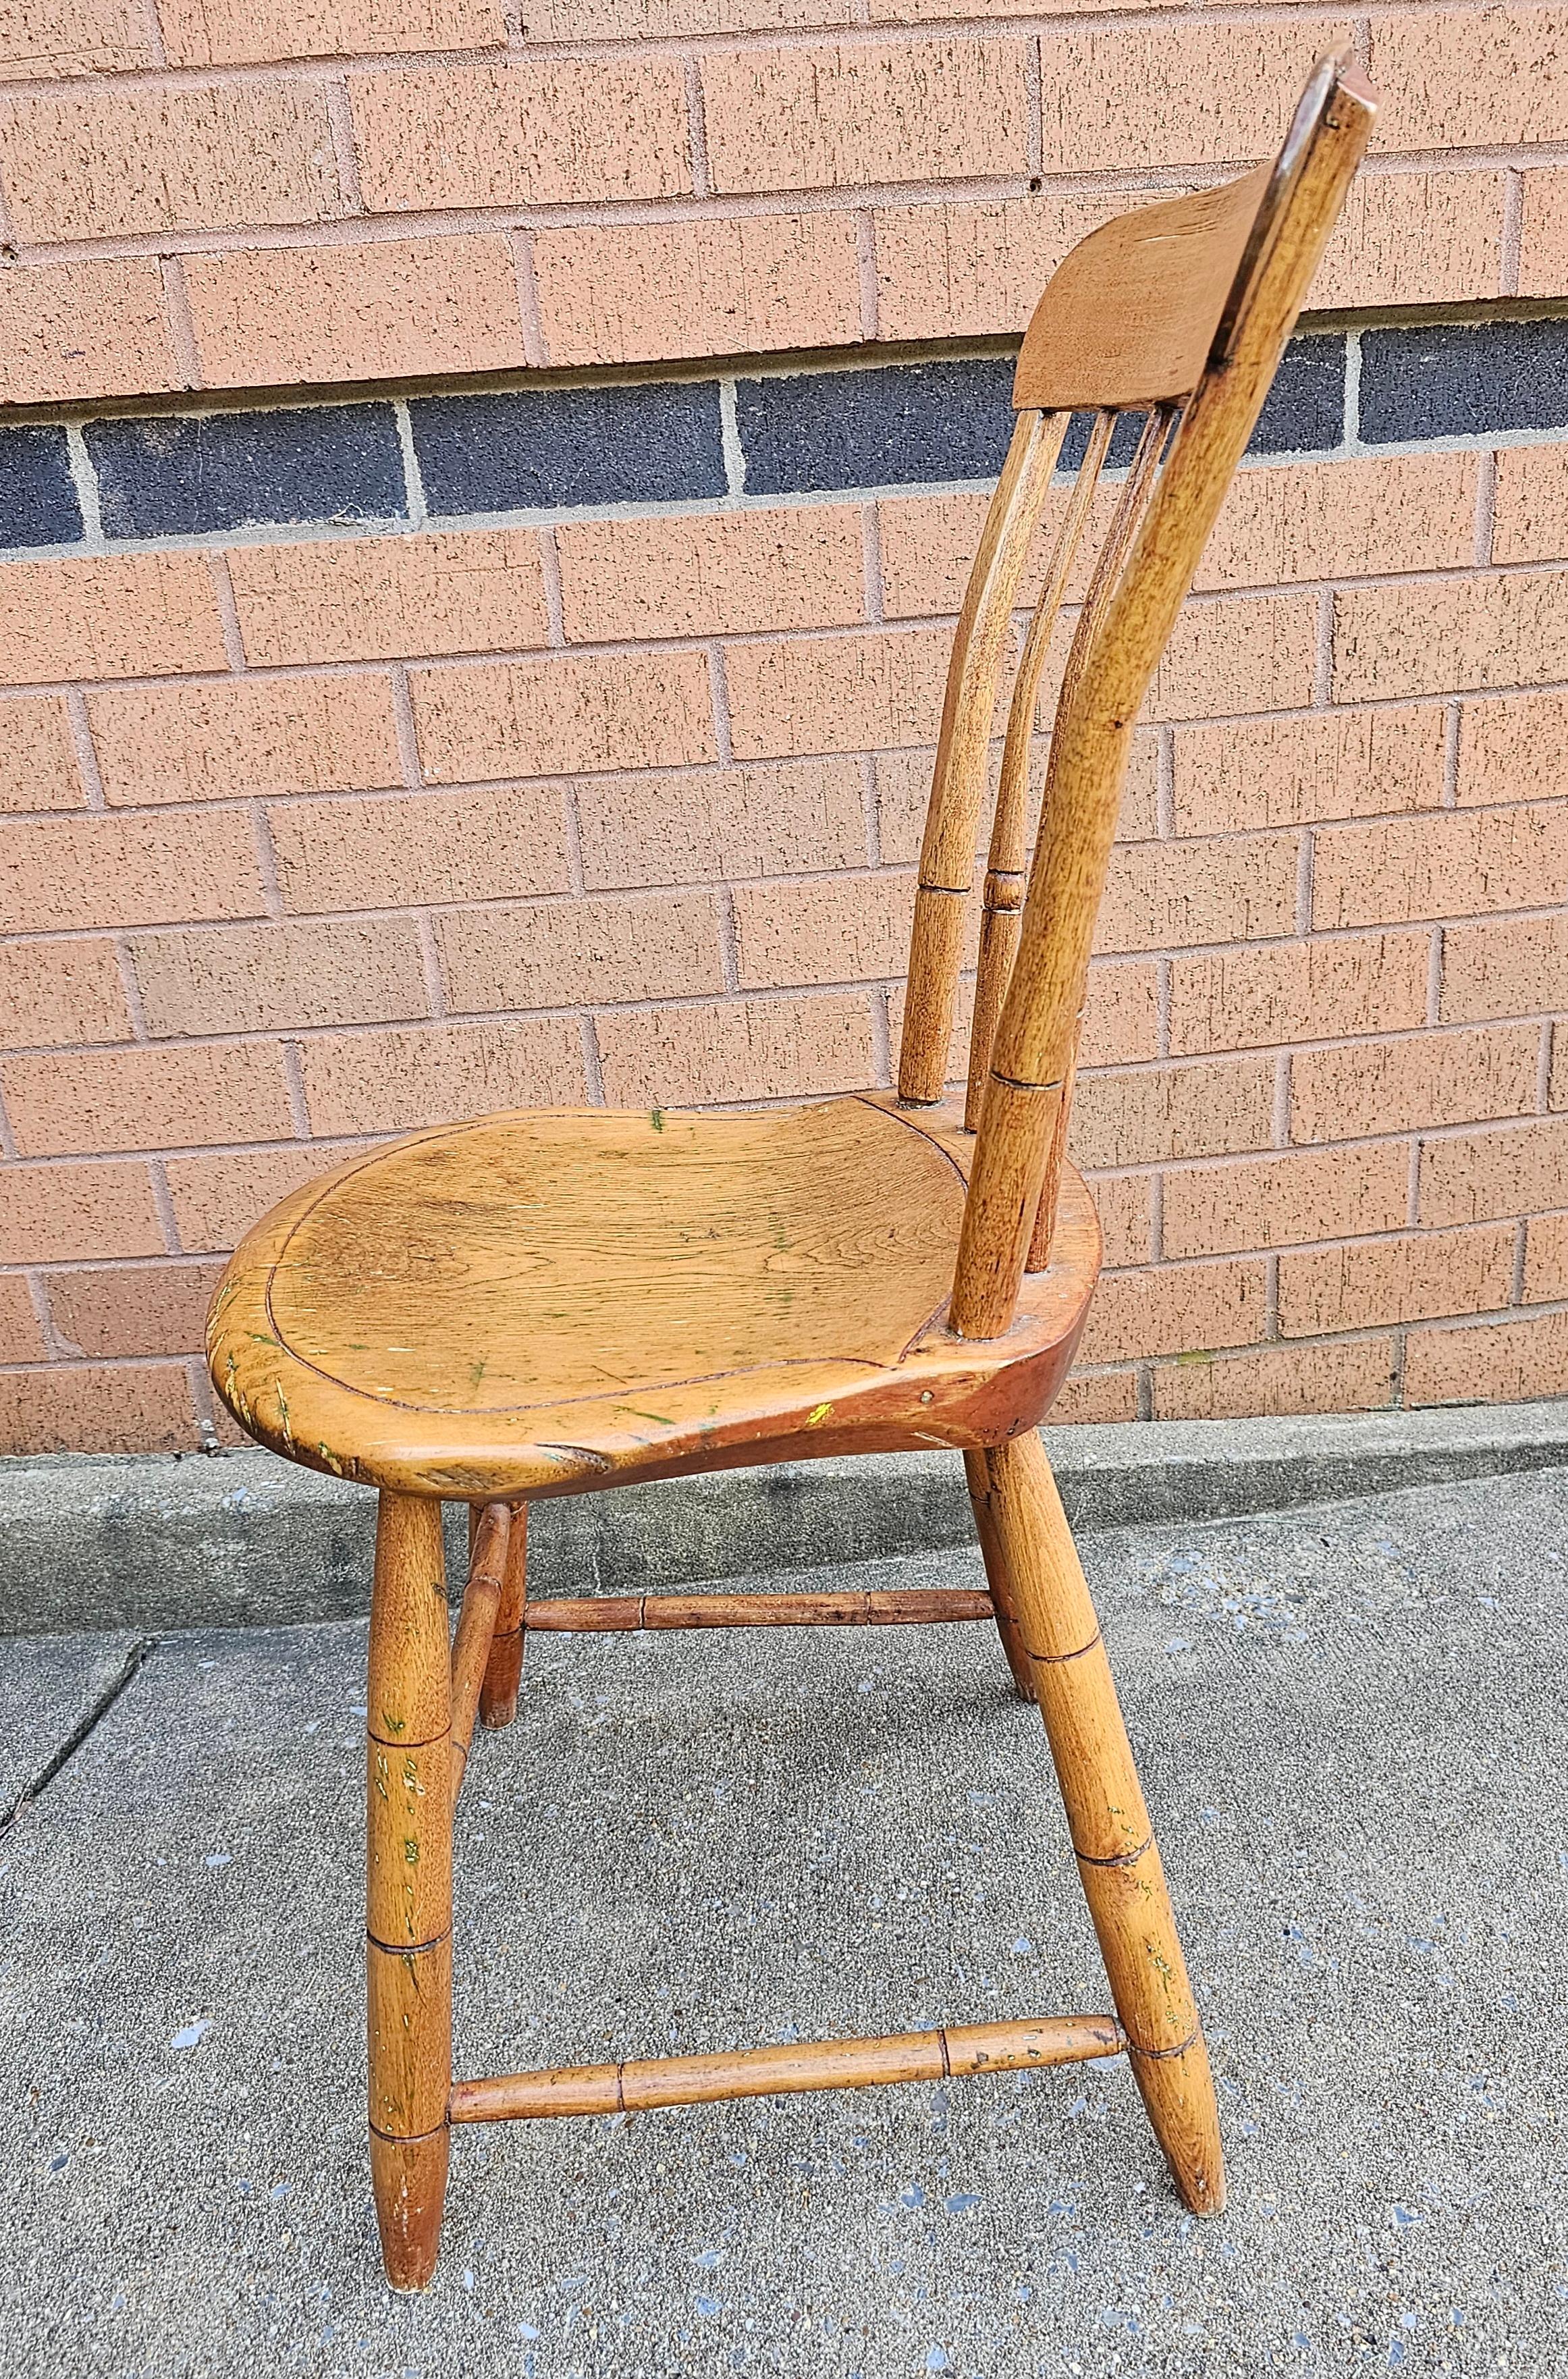 An Early American Patinated Maple Plank Chair, Eraly 20th Century. Great patina. Not just for decorative purpose only. Very sturdy for actual use. No wiggles or squikies. Measures 16